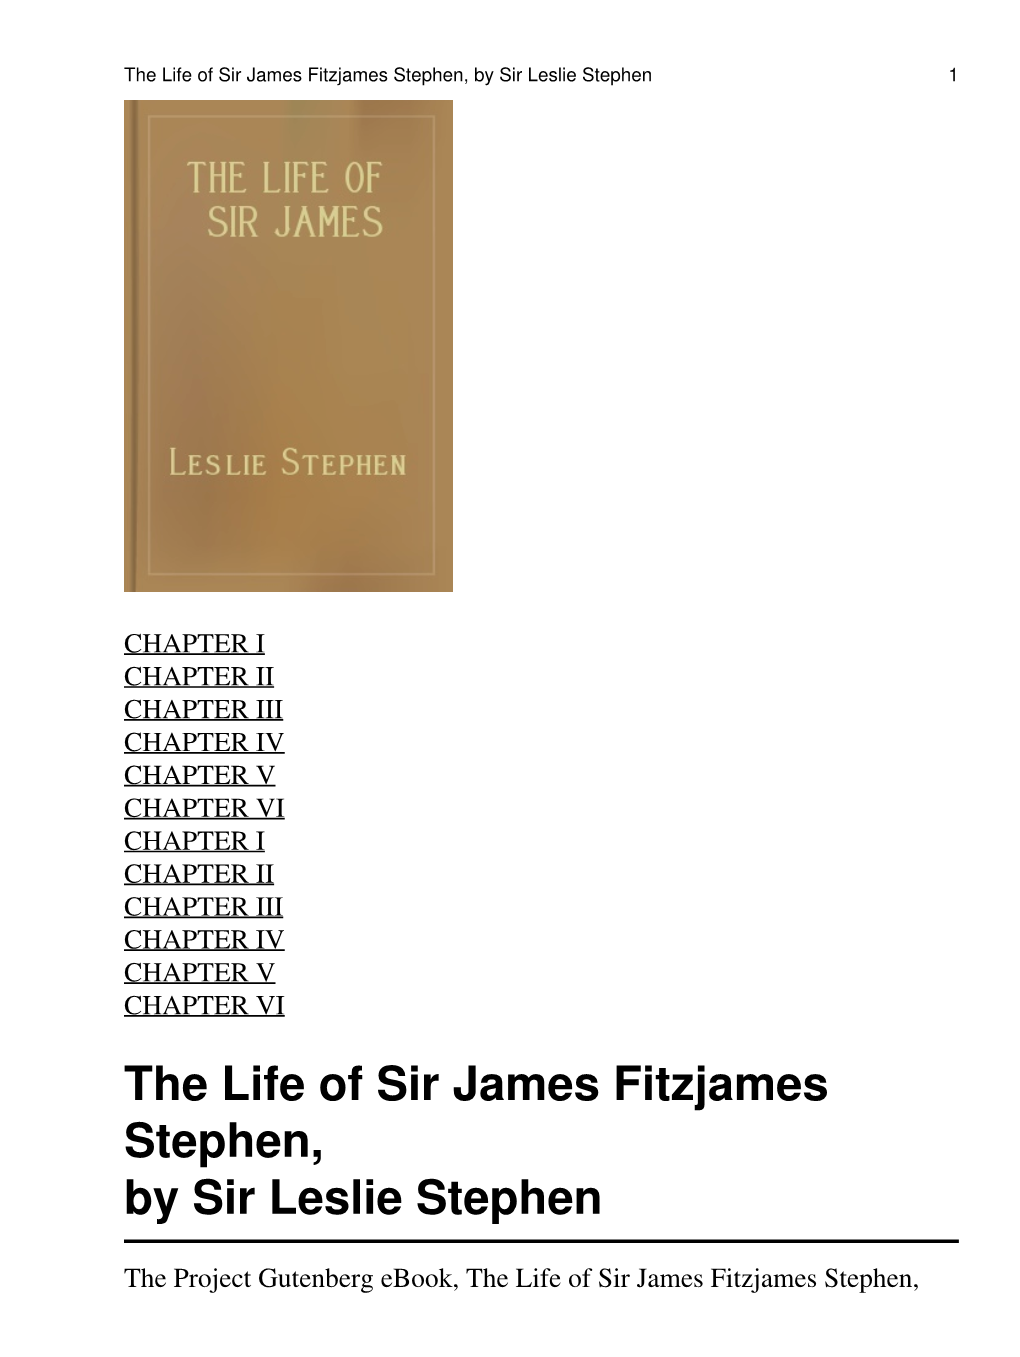 The Life of Sir James Fitzjames Stephen, Bart., K.C.S.I. a Judge of the High Court of Justice